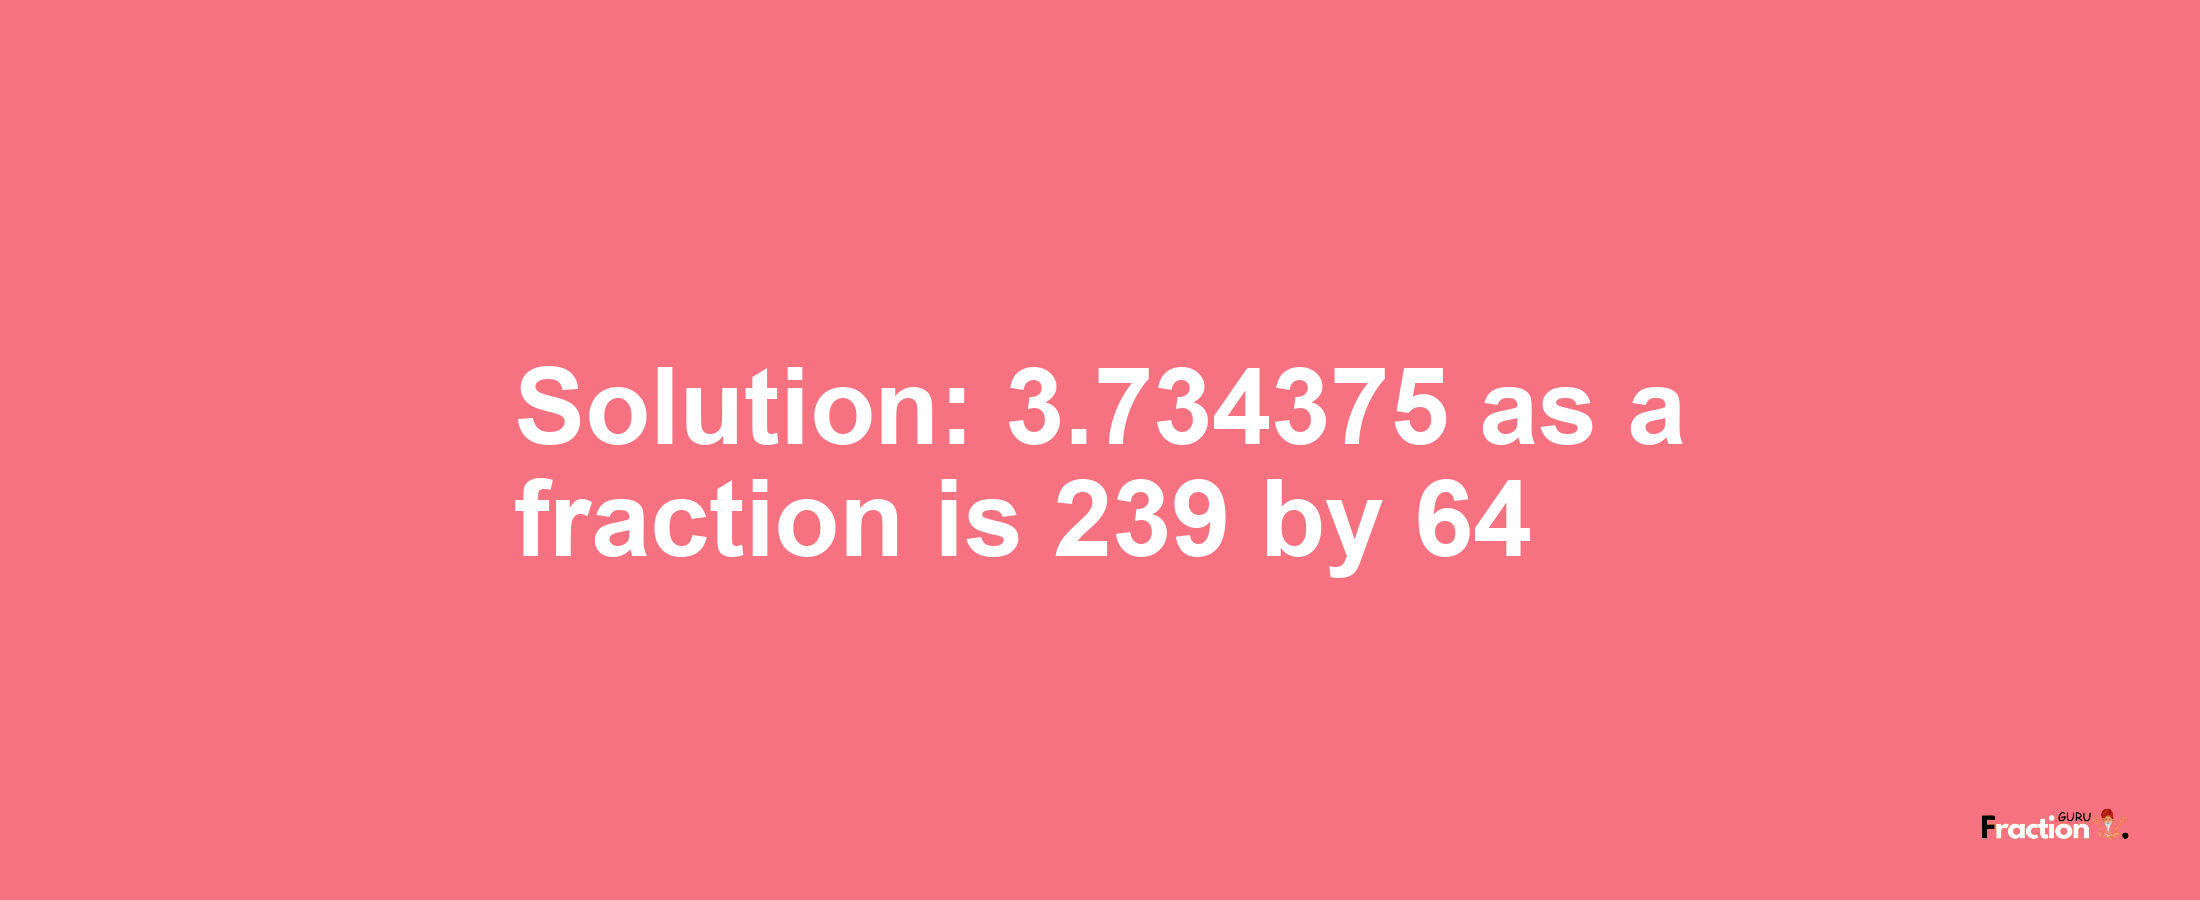 Solution:3.734375 as a fraction is 239/64